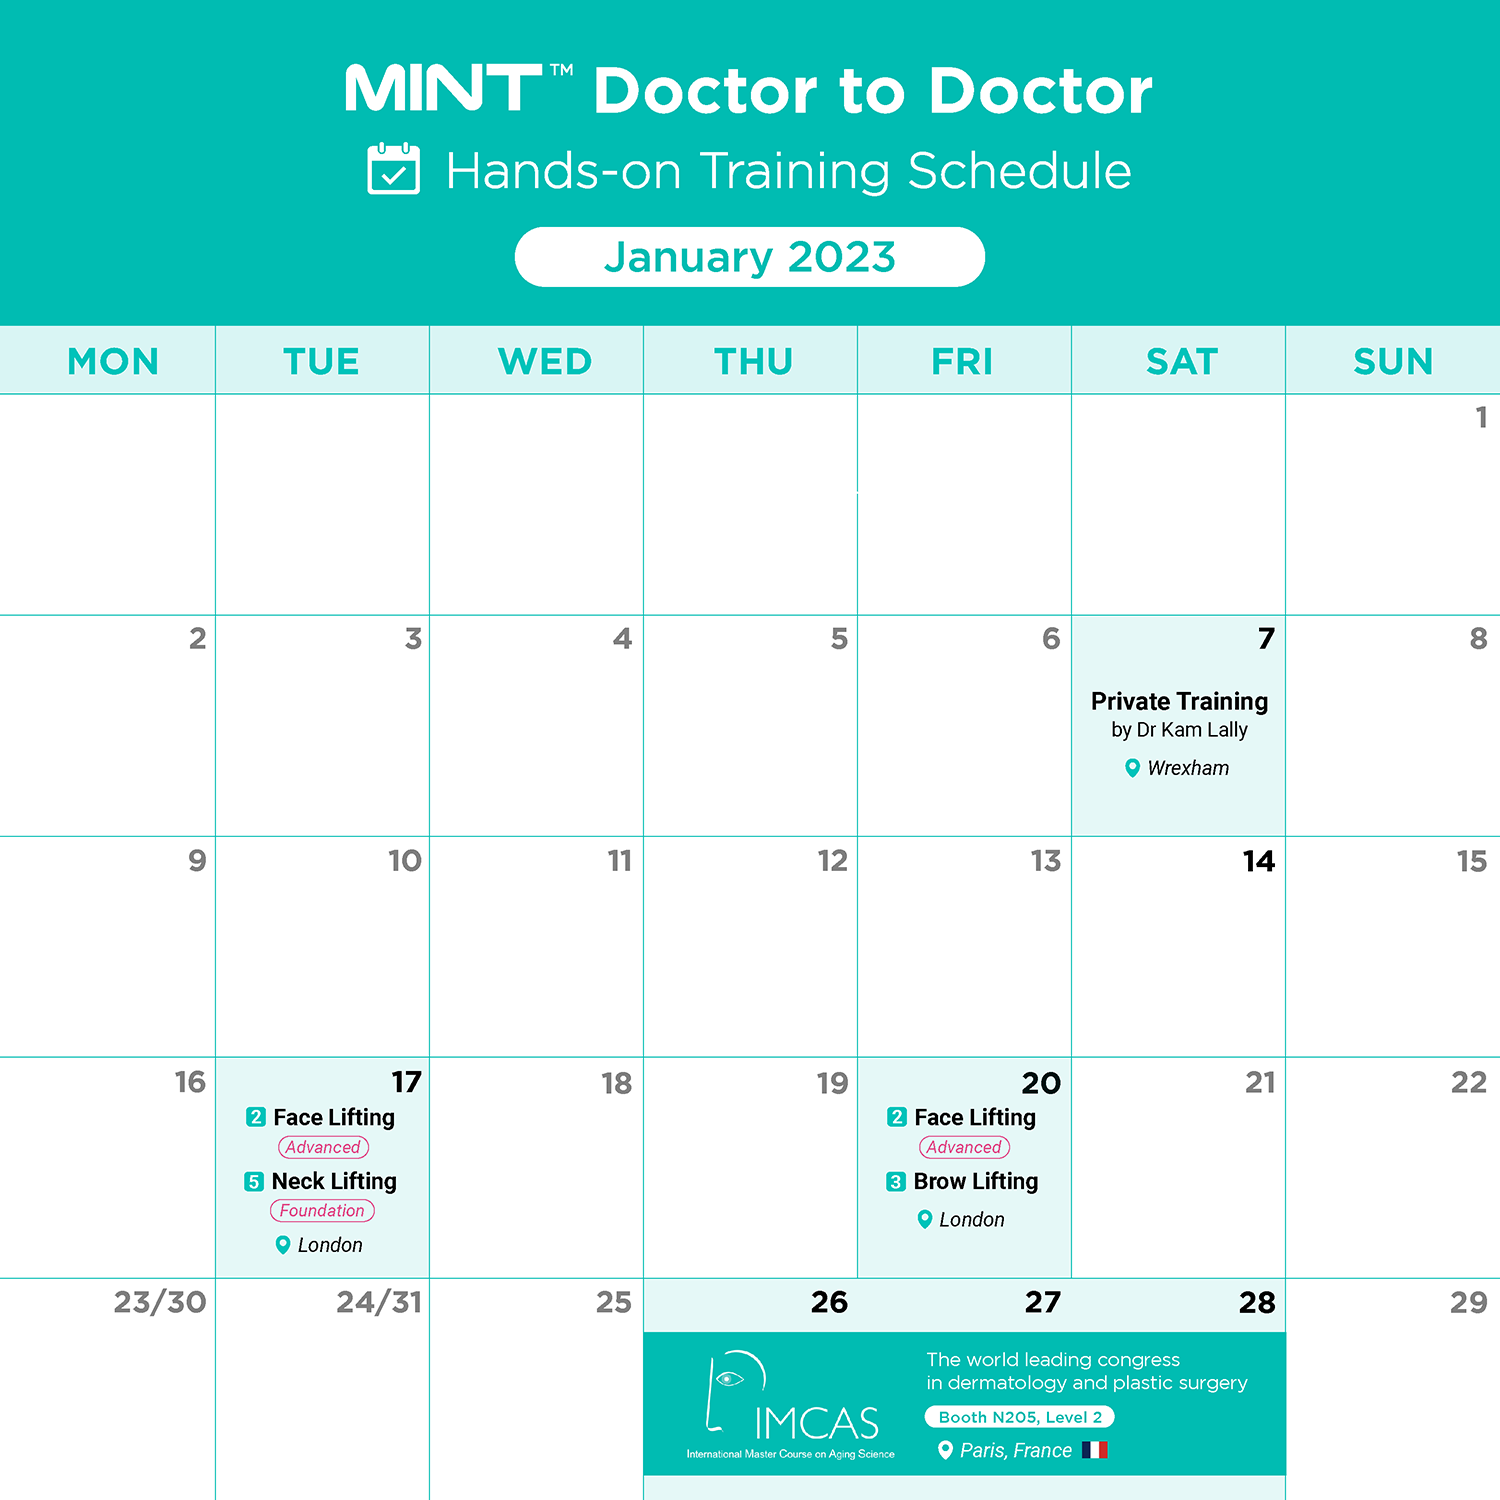 MINT PDO Doctor to Doctor Hands-on Training Schedule for January 2023